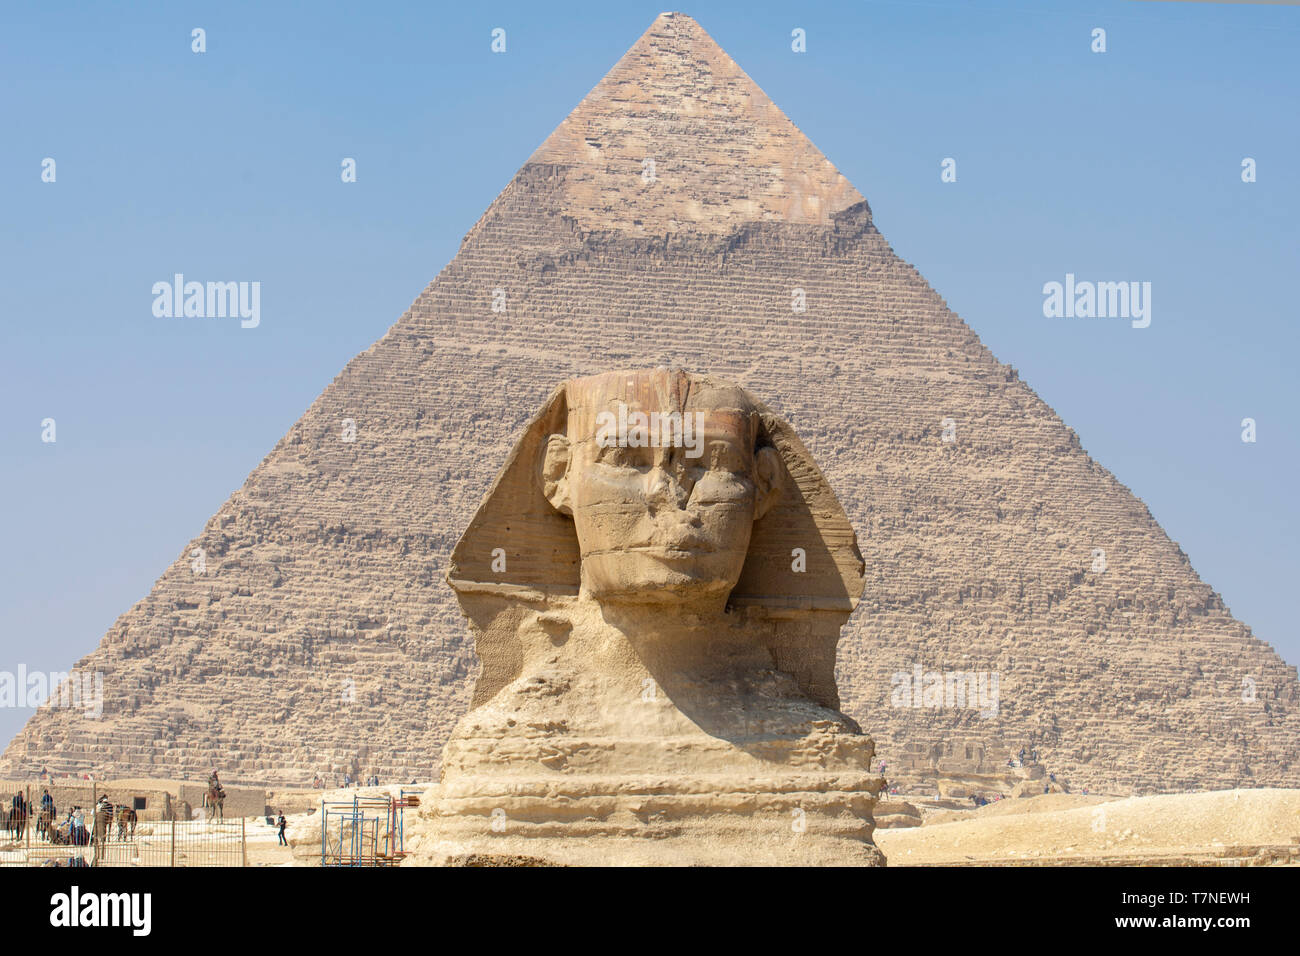 Pyramid and tomb of Pharaoh Khafra rises behind the Great Sphinx, in Giza, Egypt. Both are believed to have been created around 2500 BCE. Stock Photo